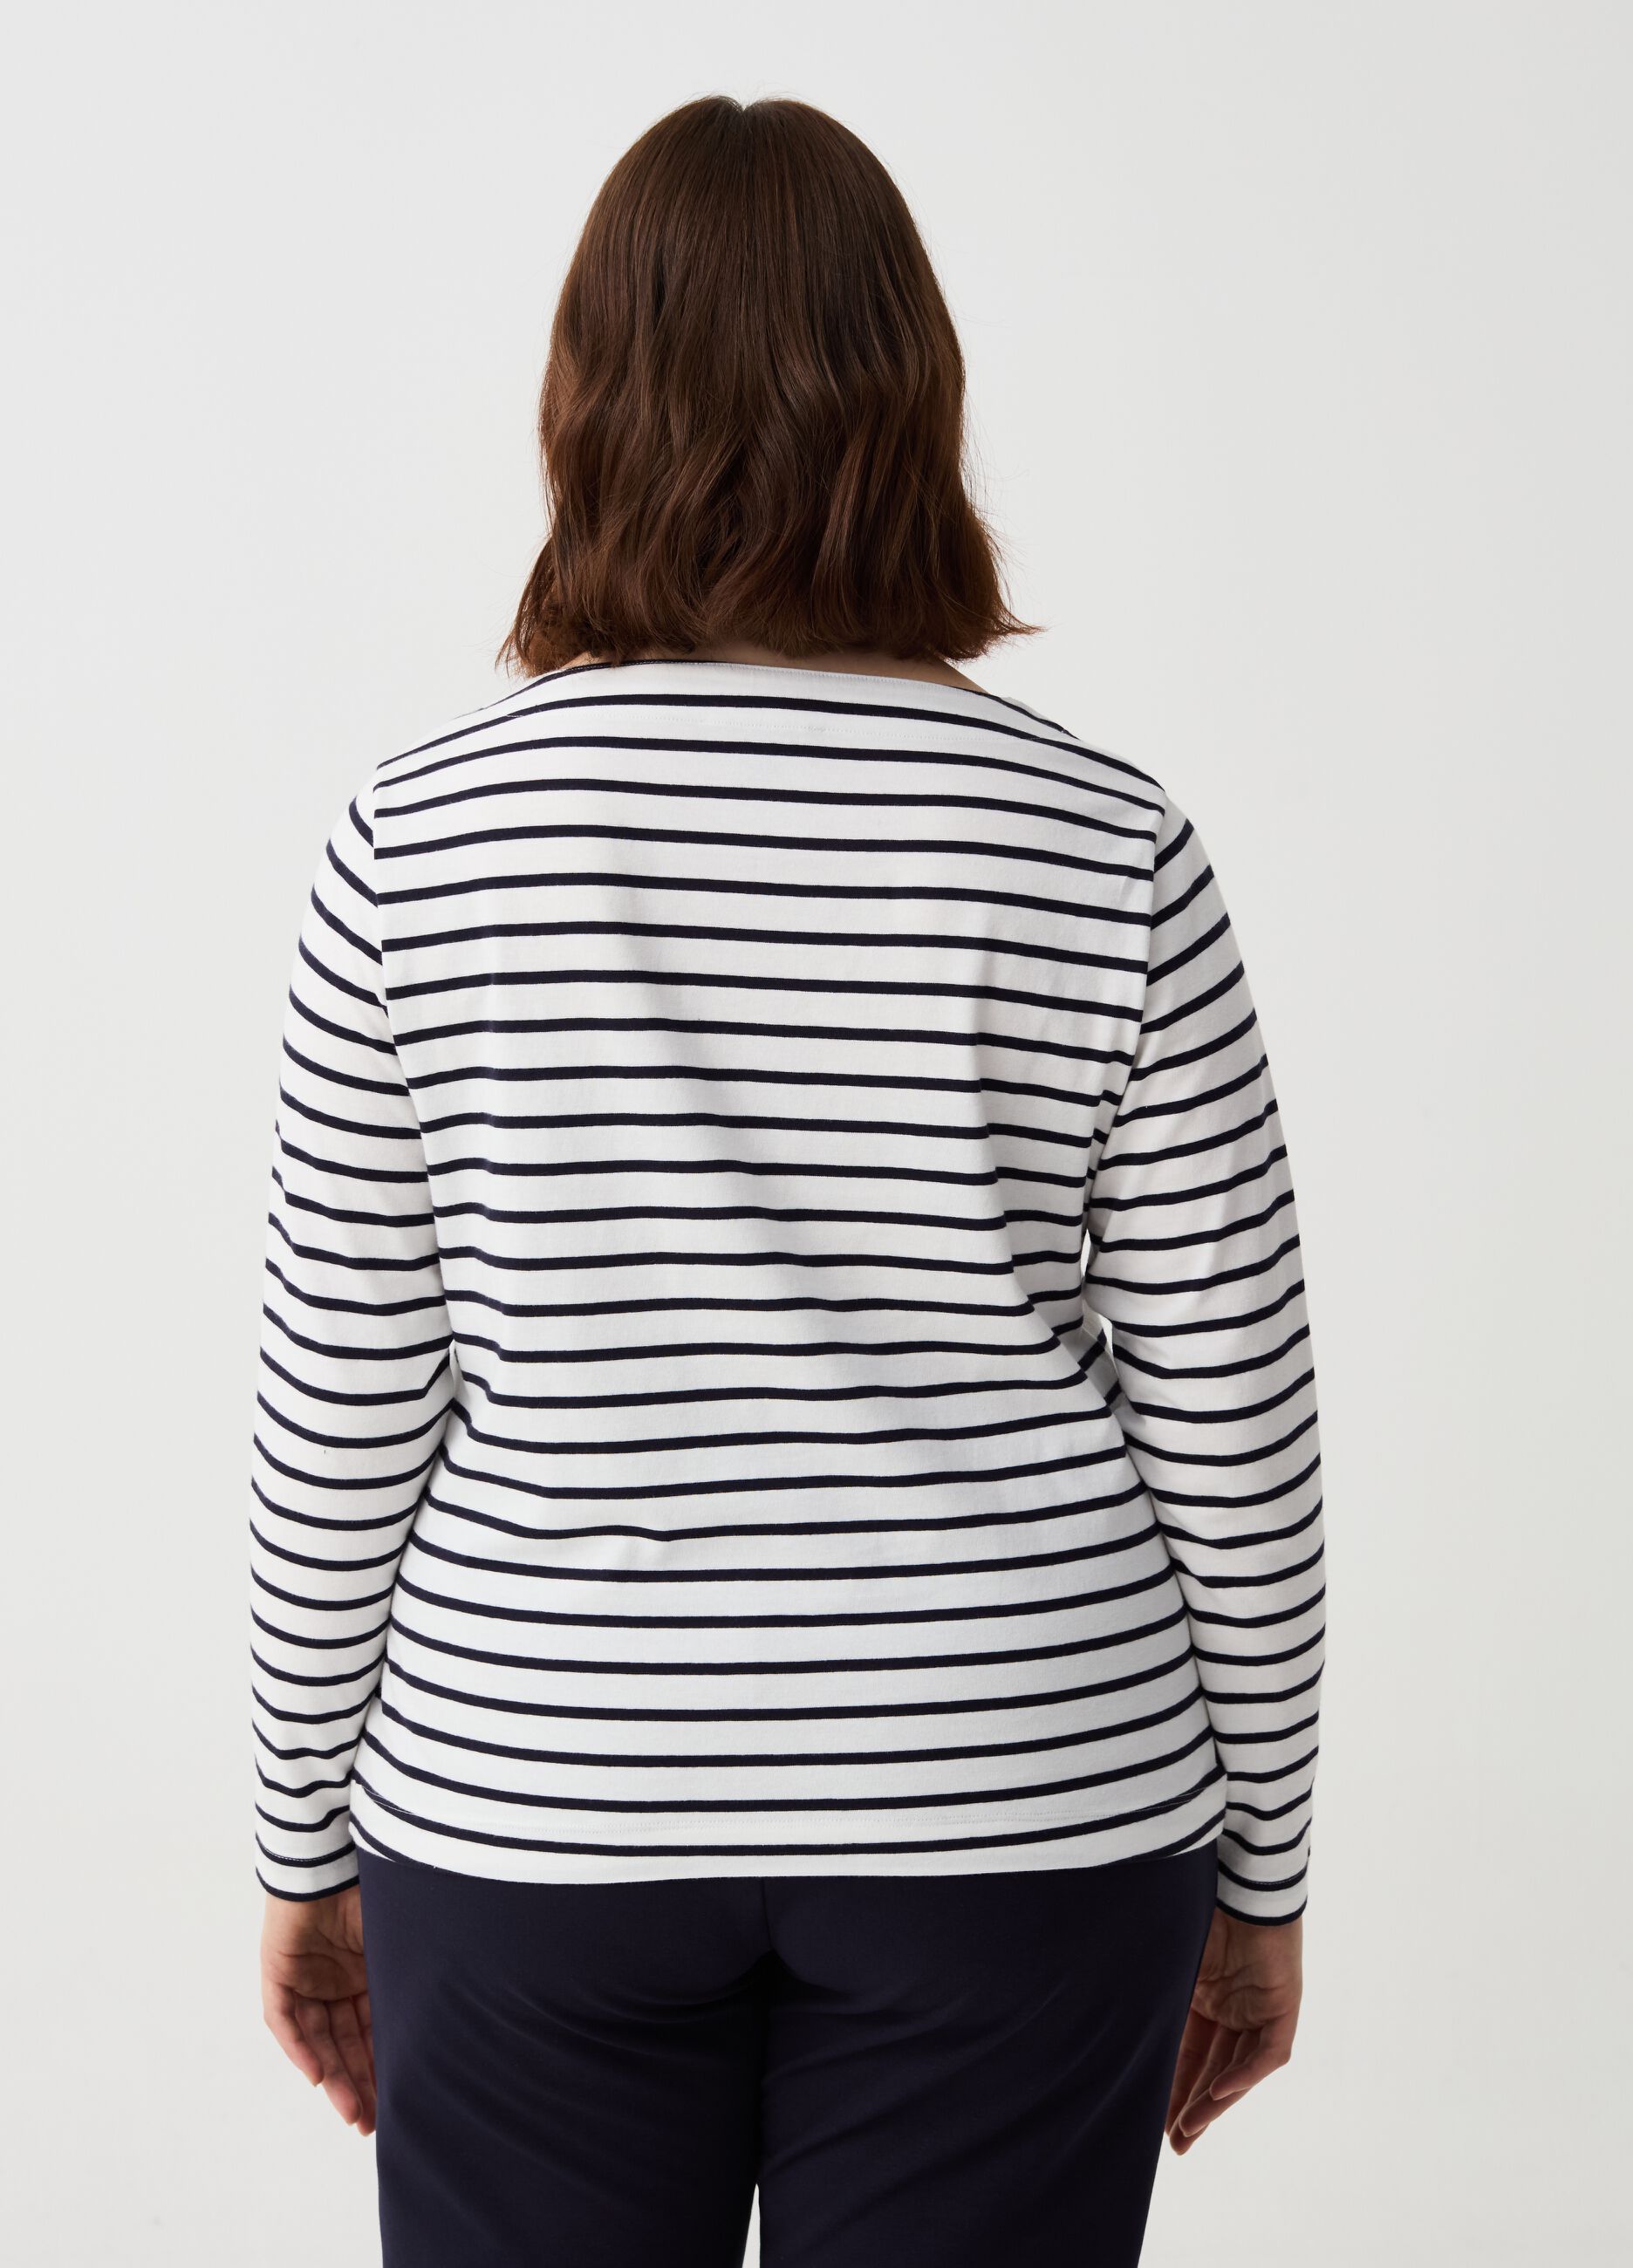 Curvy striped T-shirt with long sleeves